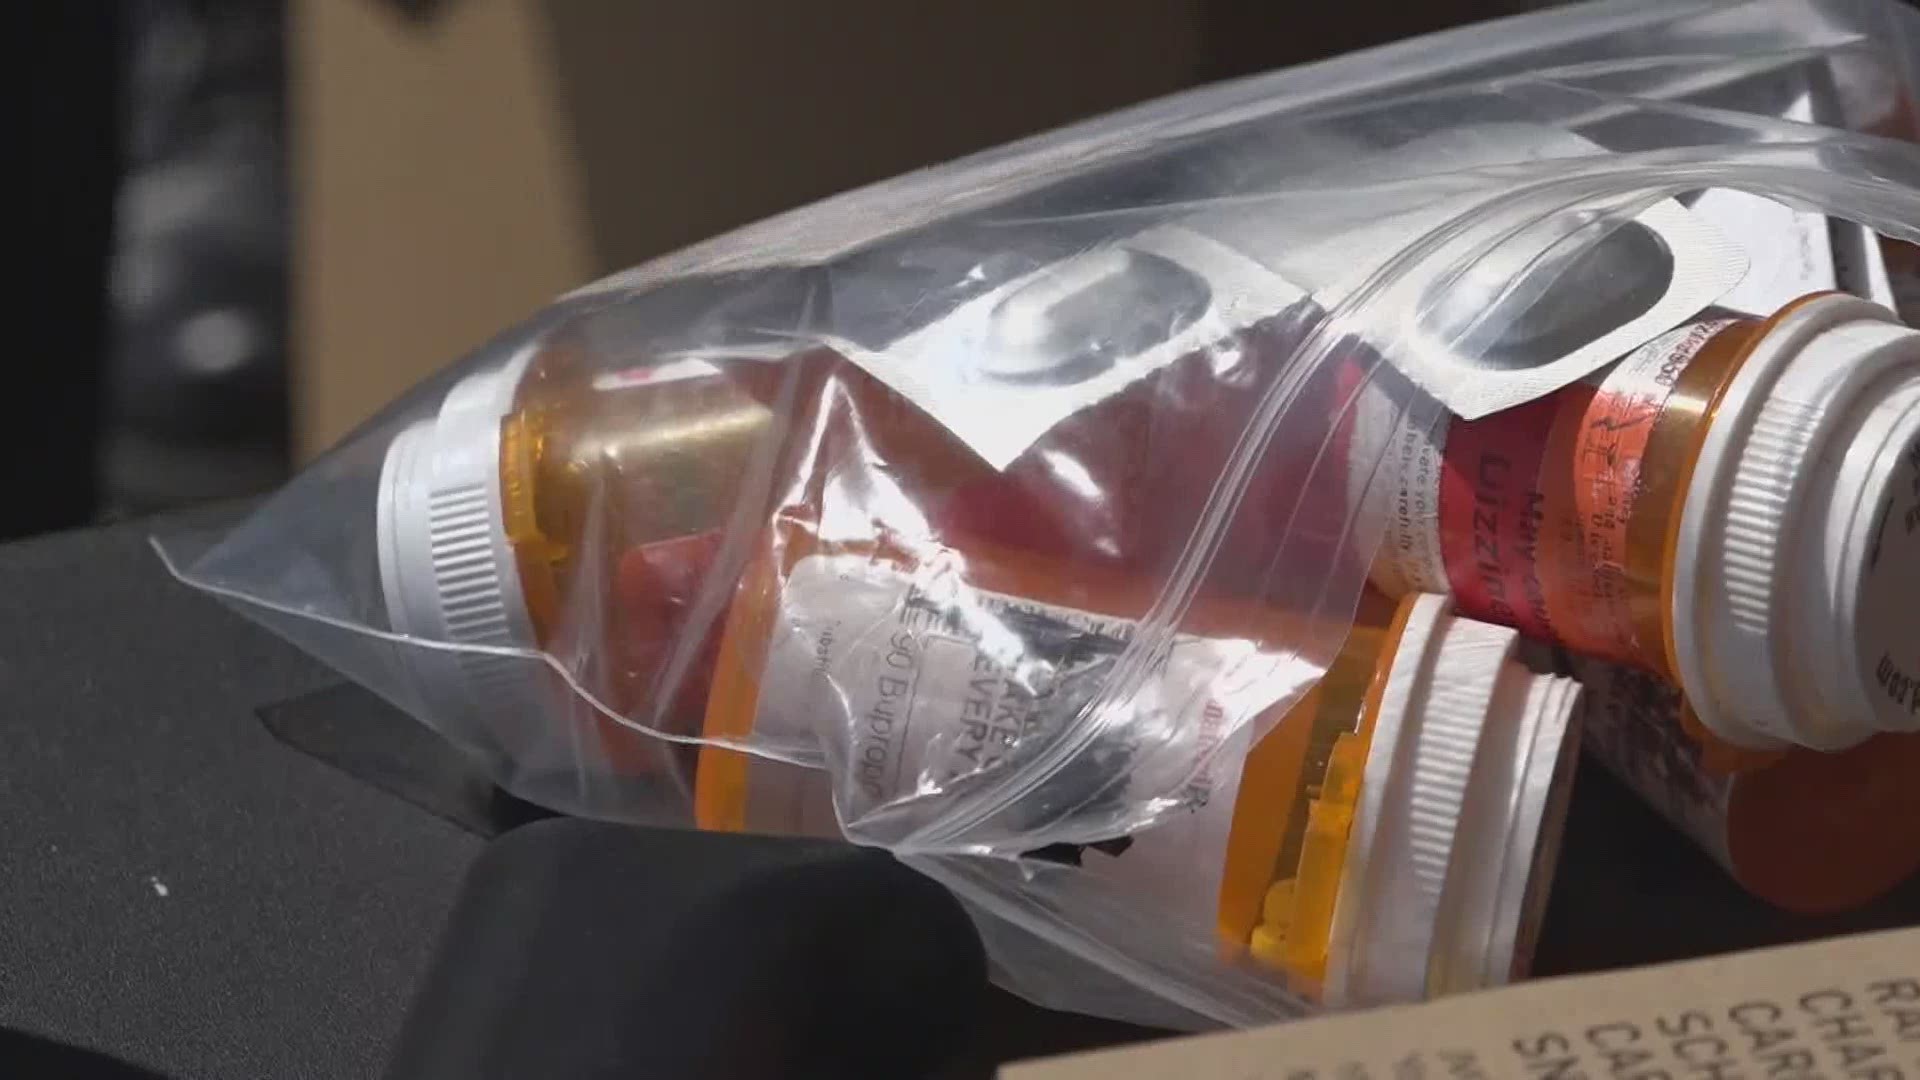 Drug Take Back events were held across the state on Saturday, and officers say it's a great way to connect with their communities and promote safe drug disposal.